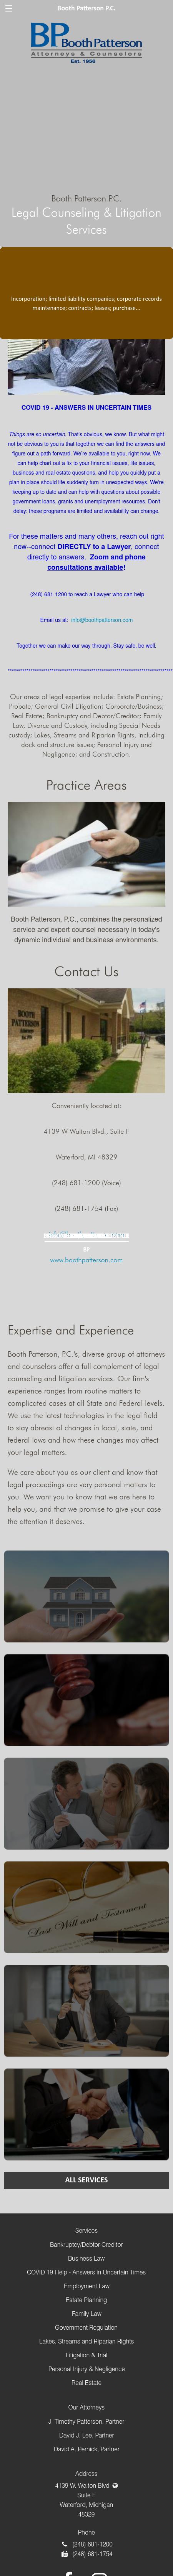 Booth Patterson P.C. - Waterford MI Lawyers